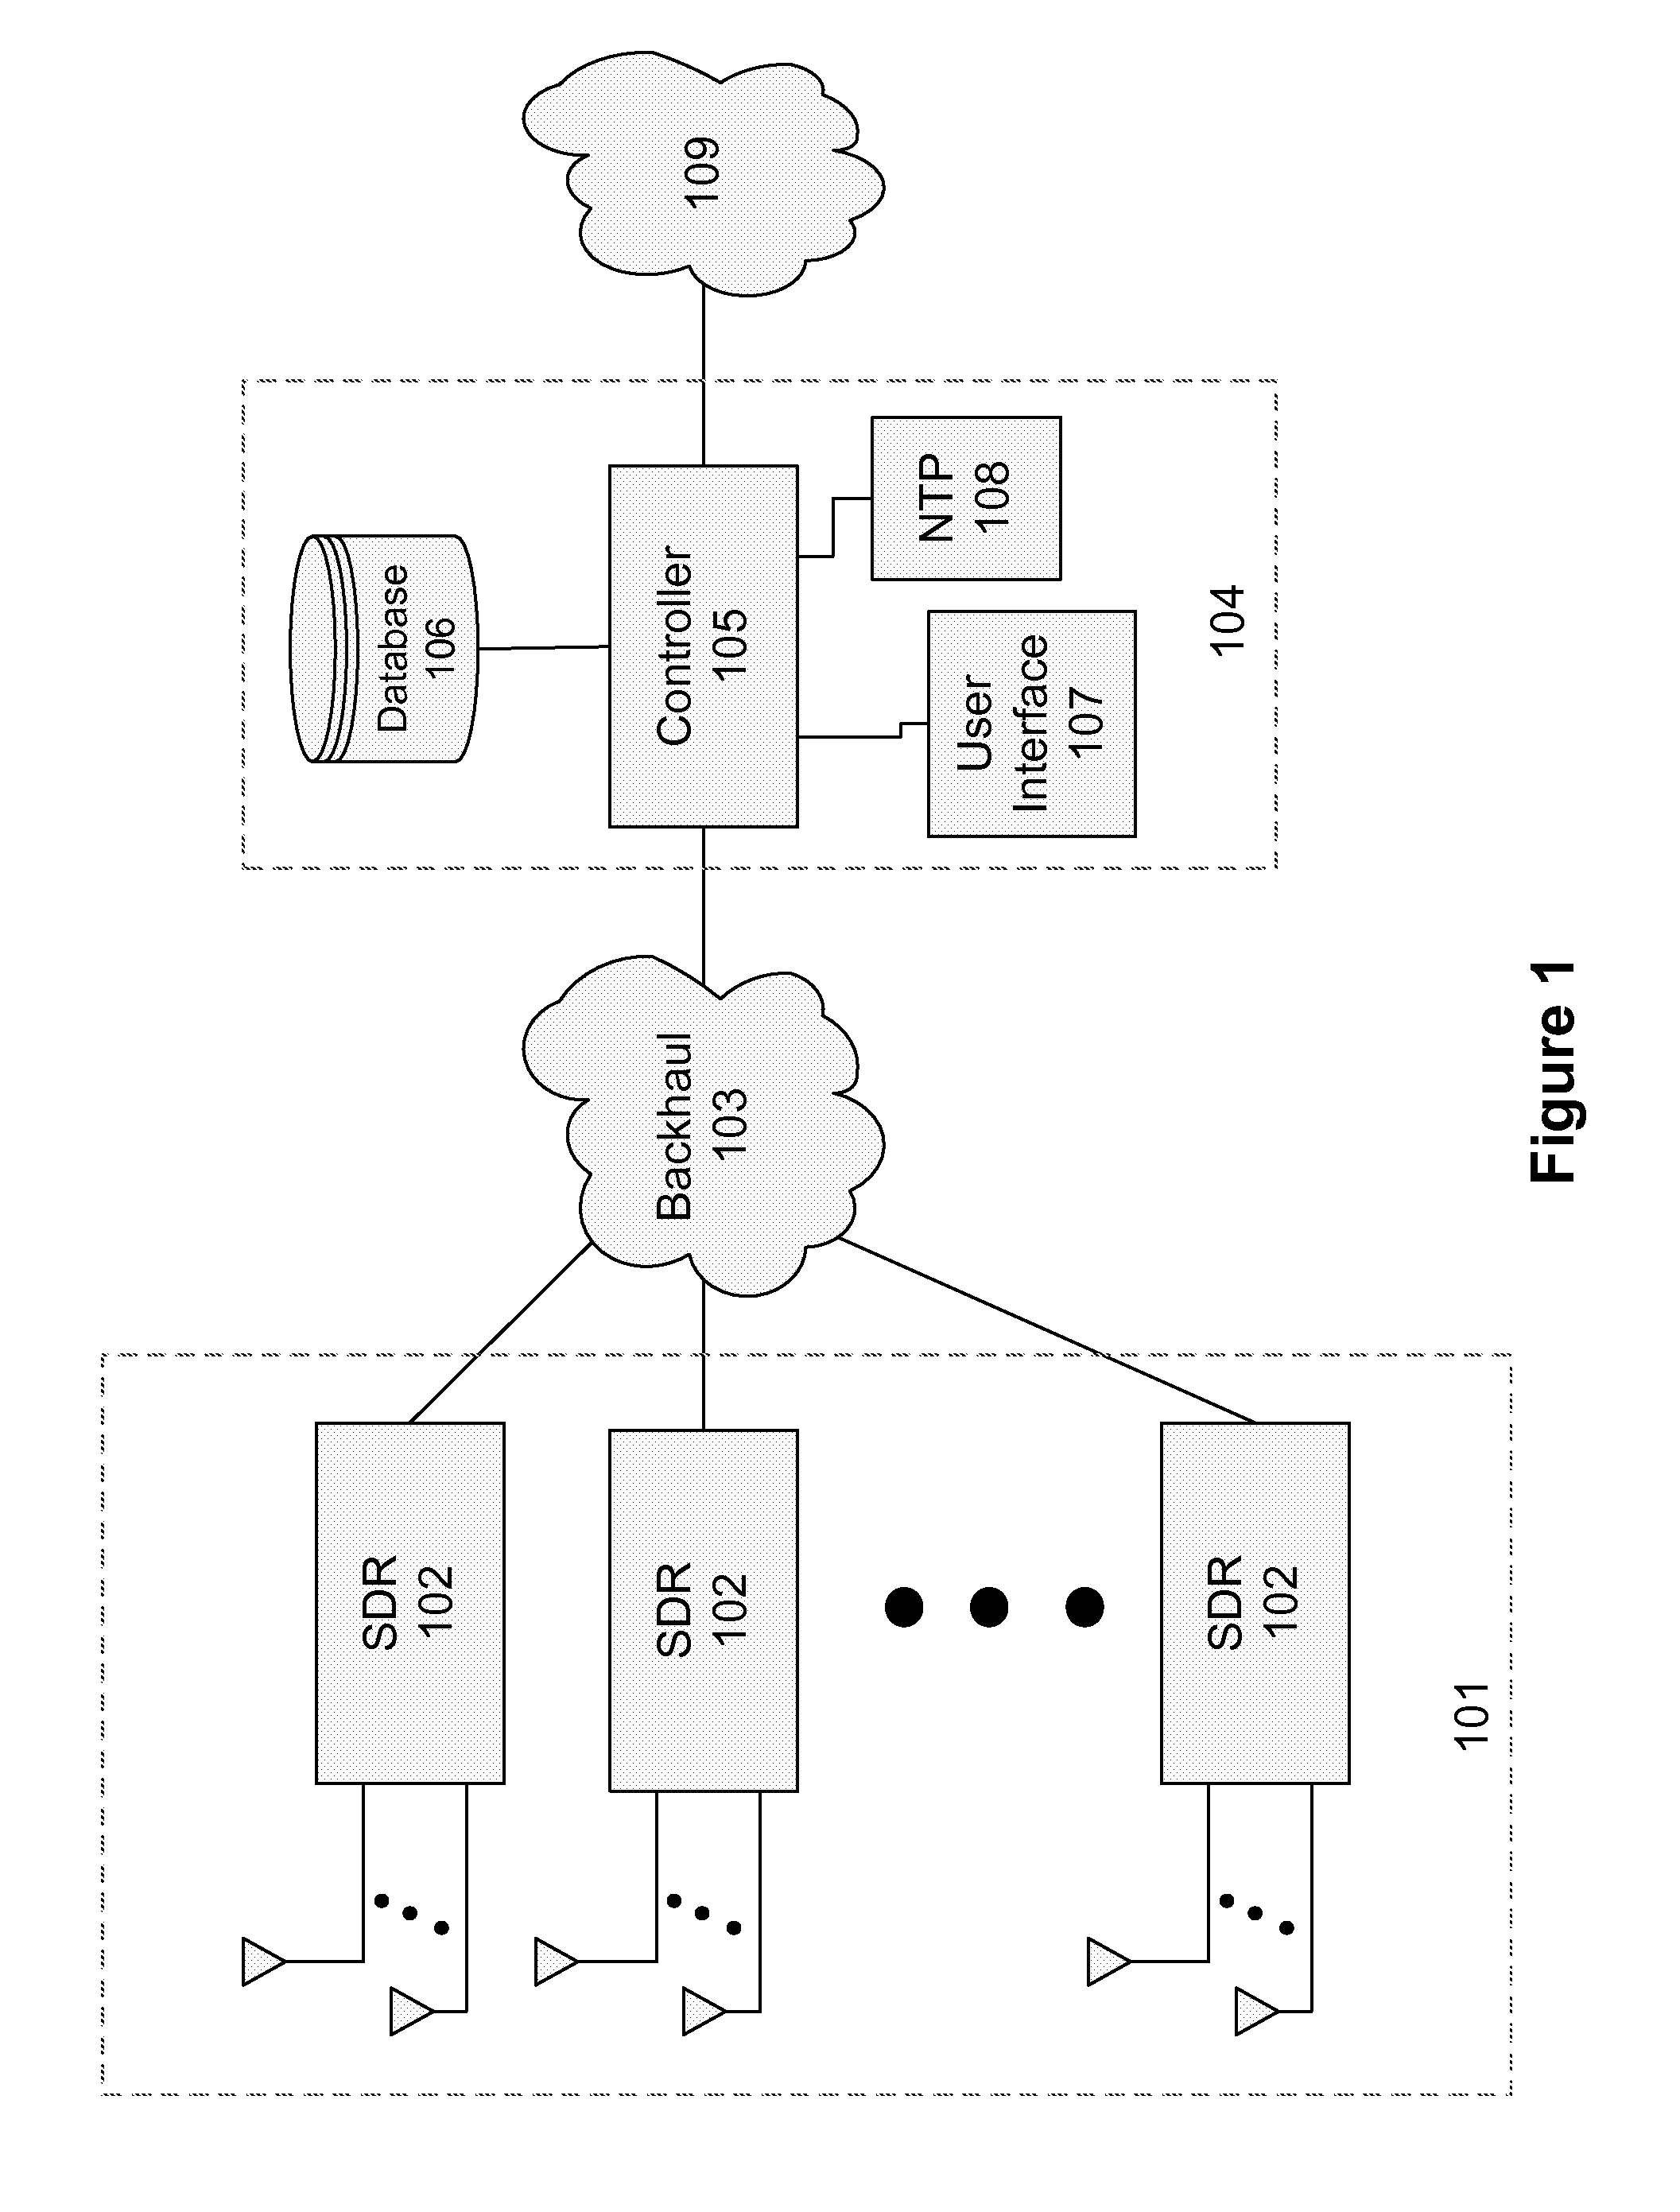 Interference detection, characterization and location in a wireless communications or broadcast system